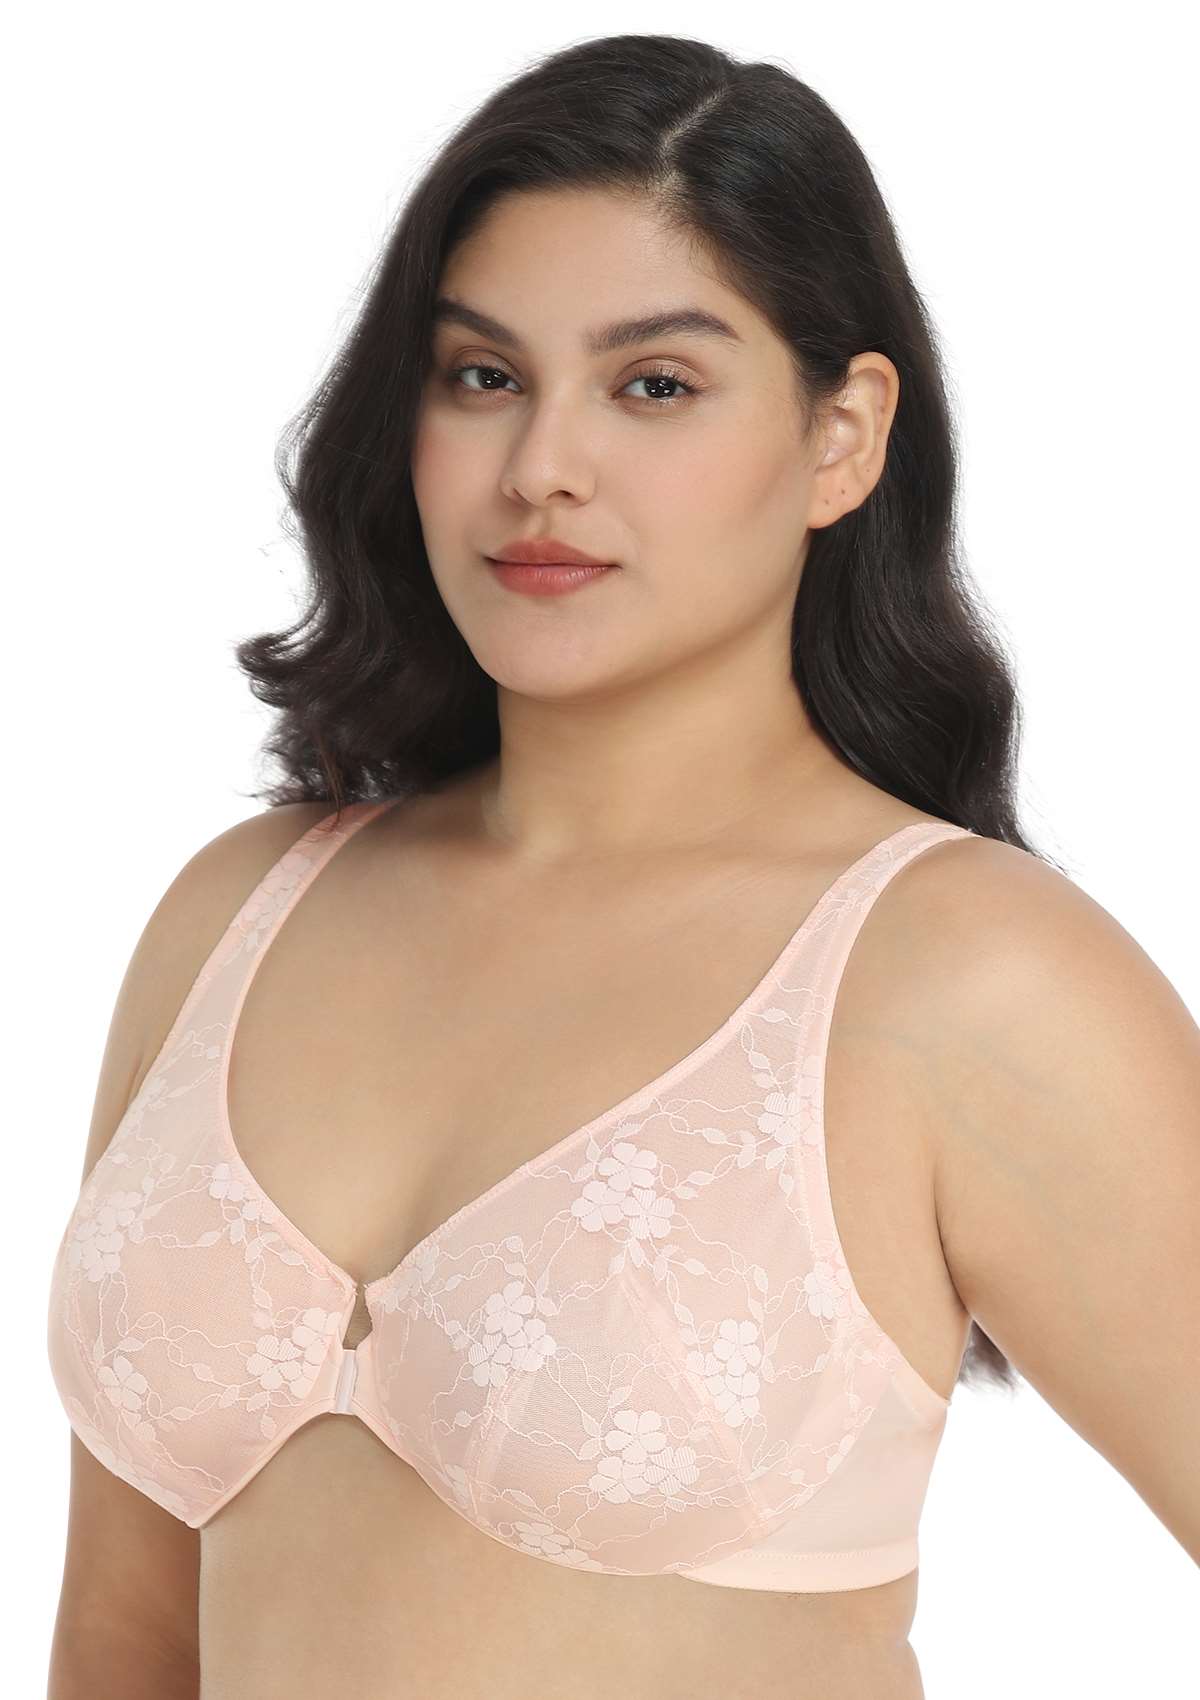 HSIA Spring Romance Front-Close Floral Lace Unlined Full Coverage Bra - White / 40 / G